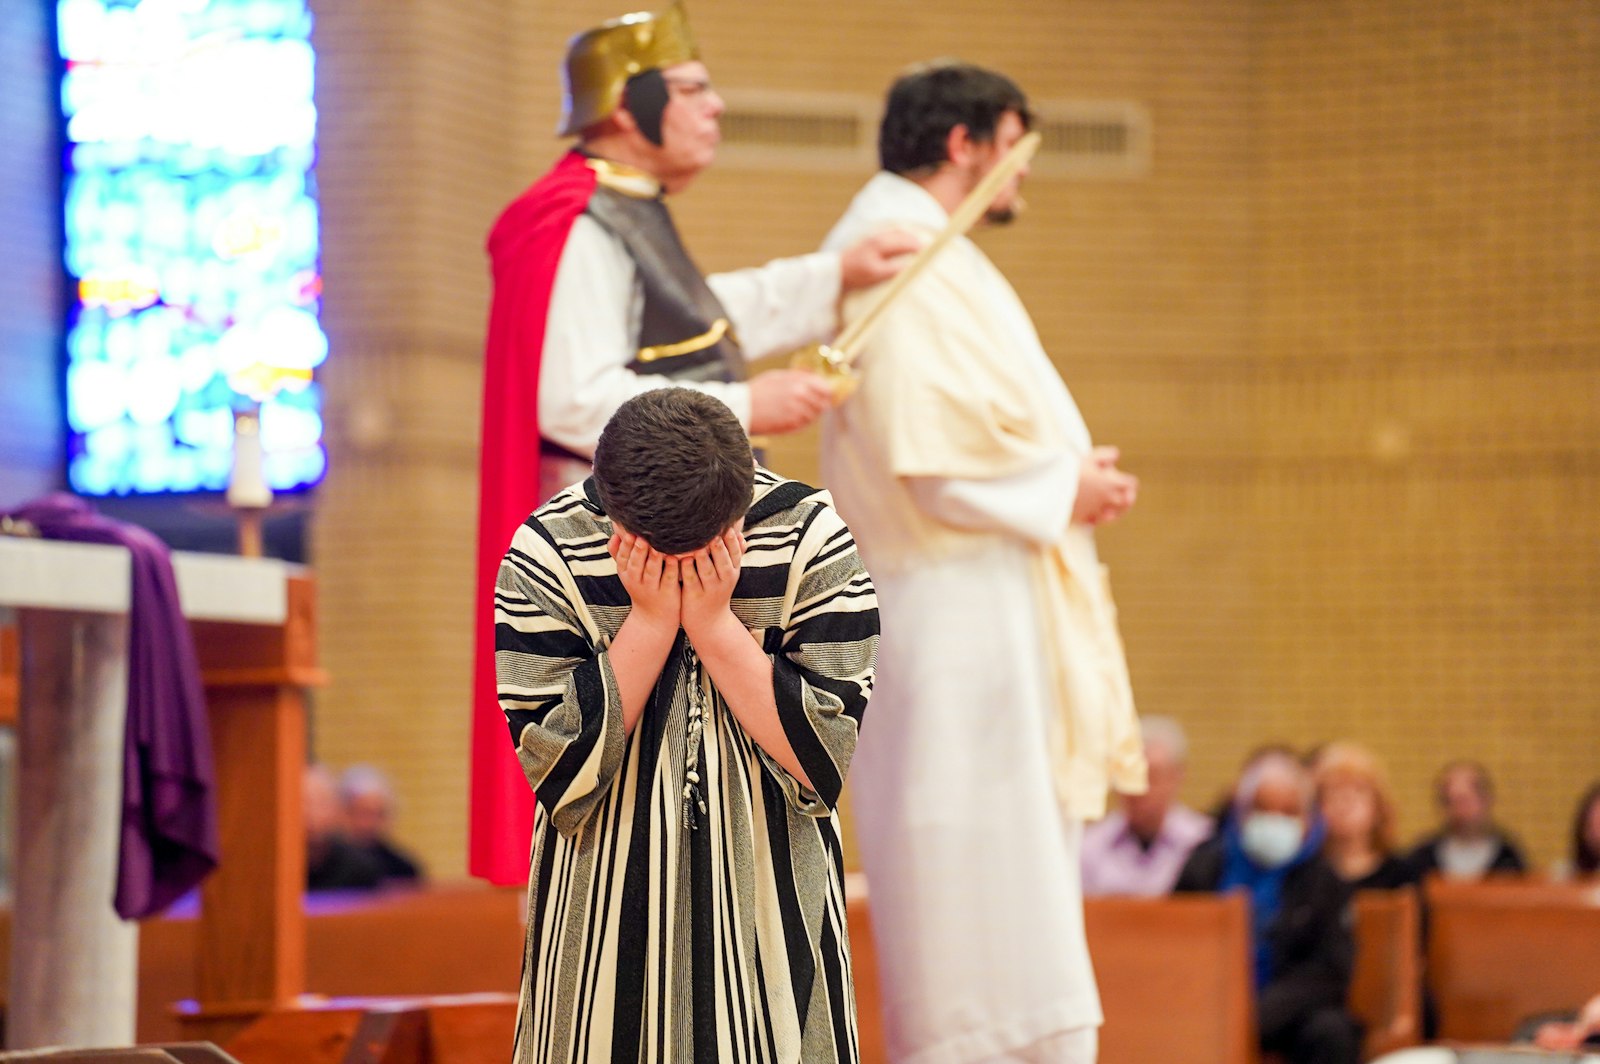 A performer weeps during the Living Stations of the Cross as Jesus, played by Richard Smith, is sentenced.